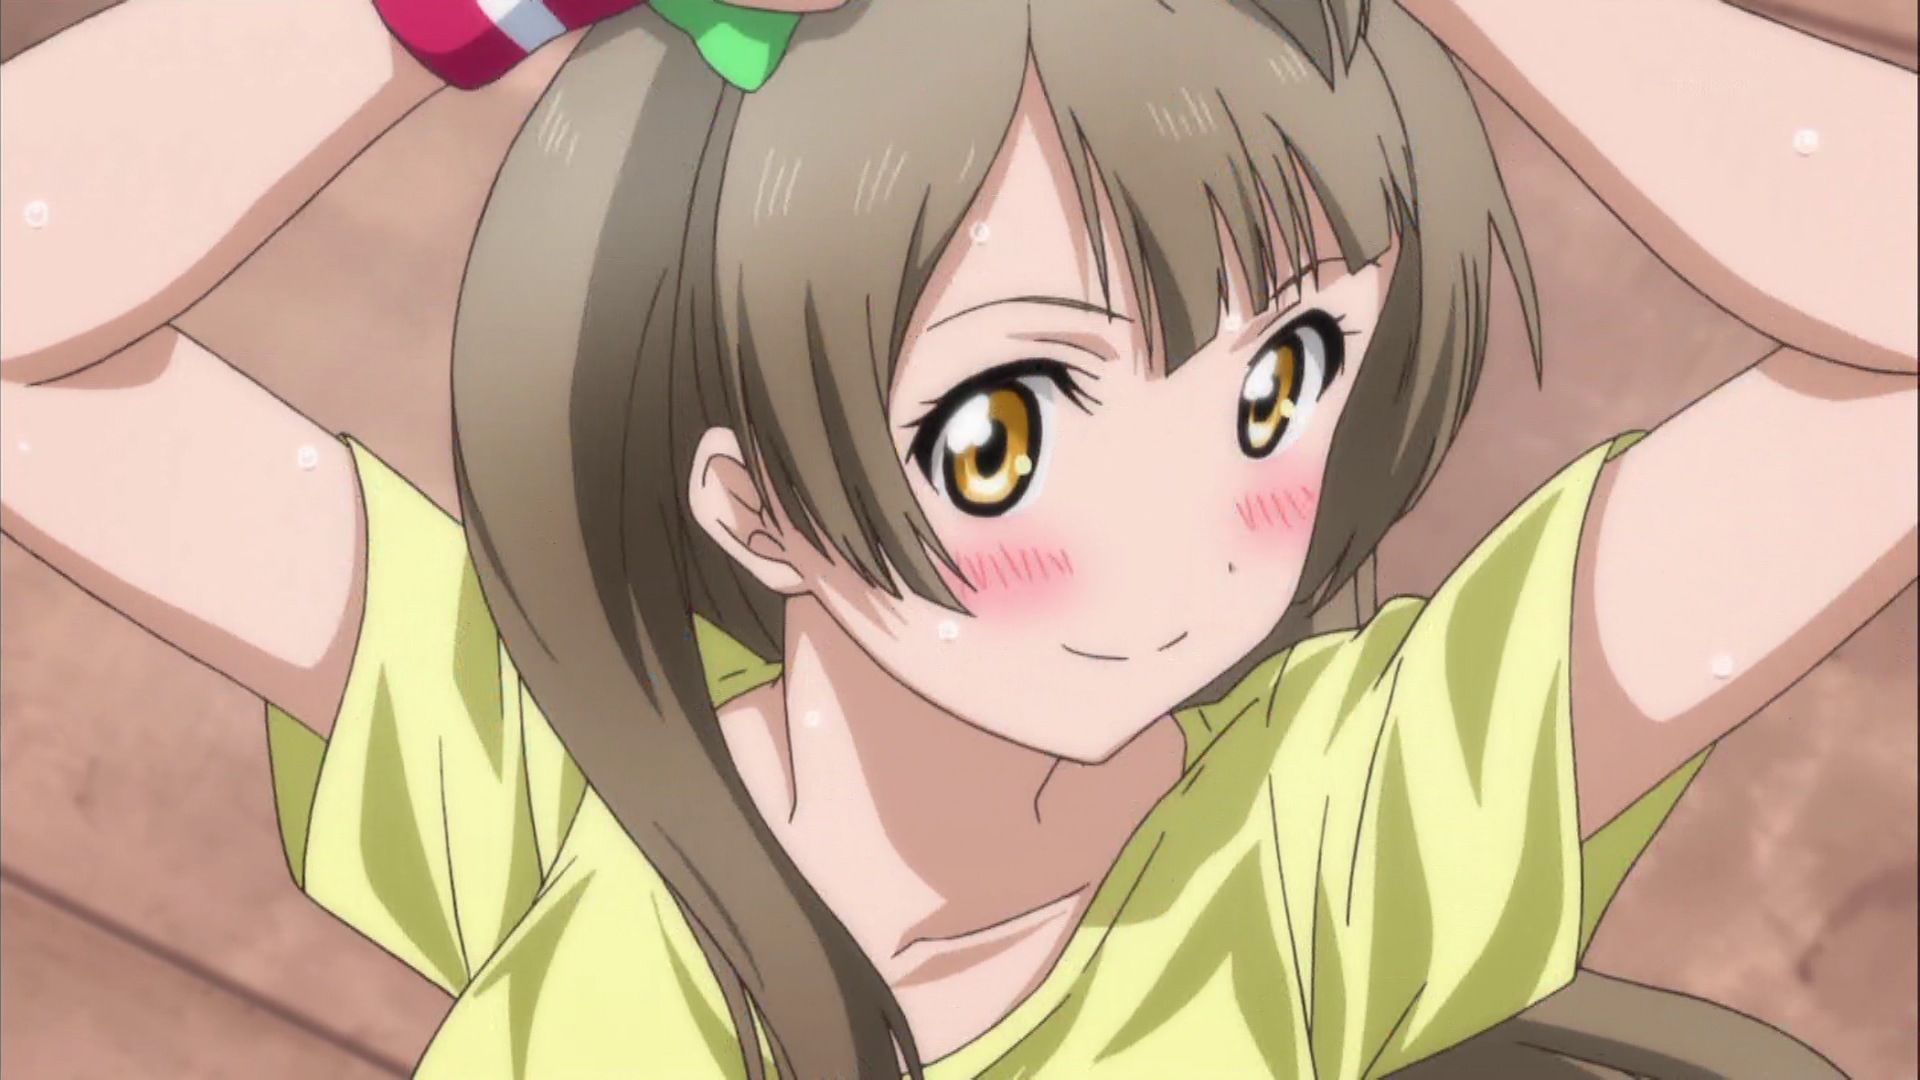 [Image] "love live! ' Big Totoro kotori-Chan and I ○ want erotic too awesome. wwwww 5